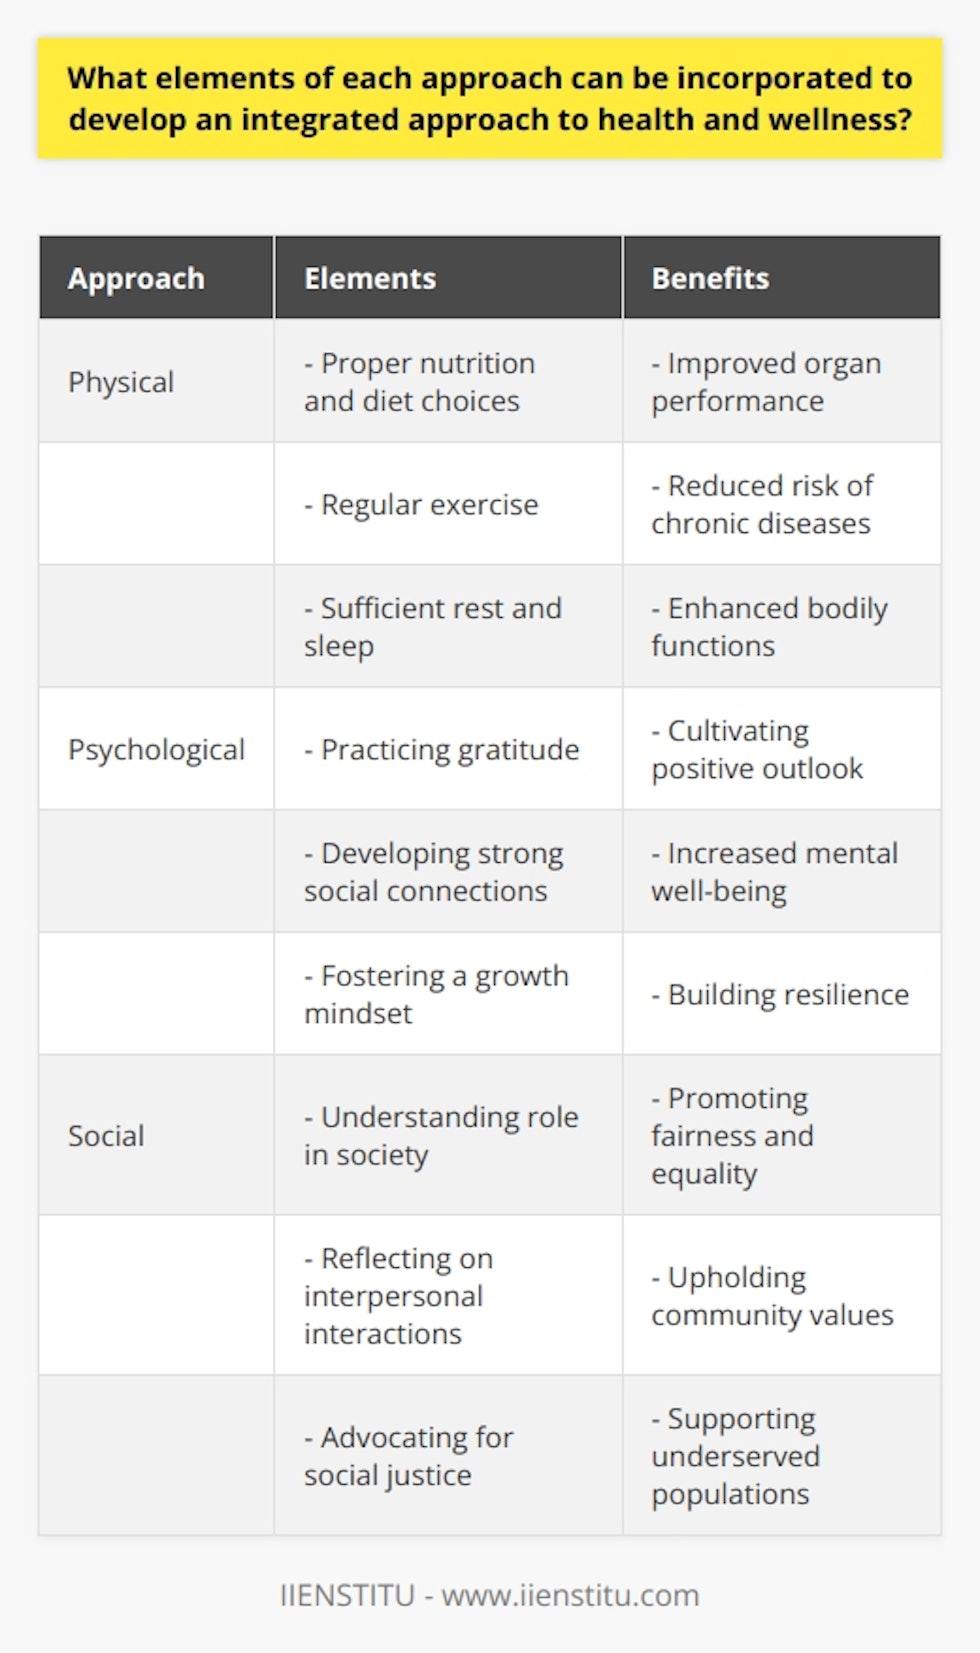 An integrated approach to health and wellness can incorporate elements from each of the traditional approaches, physical, psychological, and social, to create a more comprehensive and holistic outlook on well-being. By combining these aspects, individuals can maximize their potential for a meaningful and fulfilling life.In terms of the physical aspect, individuals can incorporate proper nutrition and diet choices into their routine. This includes consuming a balanced diet that provides essential nutrients needed for bodily functions and organ performance. Engaging in regular exercise is also crucial for overall health, as it helps reduce the risk of chronic diseases, improves heart and metabolic health, and enhances mobility. Additionally, ensuring sufficient and consistent rest and sleep is essential for physical well-being, as it supports various bodily systems and functions.The psychological aspect of health and wellness can be integrated by practicing gratitude regularly. By expressing appreciation for the positive aspects of life, individuals can cultivate a positive outlook and enhance mental well-being. Developing strong social connections, participating in festive activities, and fostering a growth mindset are also beneficial. Setting realistic and achievable goals helps individuals stay motivated and gives them a sense of purpose. These practices contribute to maintaining a positive mindset, building resilience, and increasing self-efficacy.Lastly, integrating the social aspect of health and wellness involves understanding one's role in society and how one relates to others and the environment. This includes reflecting on interpersonal interactions and striving to make positive contributions to one's community and surroundings. Advocating for social justice and supporting underserved populations are vital for upholding community values and promoting a fair and equitable society.To develop an integrated approach, individuals should ensure that all three components are implemented in a complementary and balanced manner. It is important to tailor activities to one's specific needs and preferences while still addressing all aspects of health and wellness. The ultimate goal of this integrated approach is to strive for a meaningful, fulfilling life that is centered on overall well-being and personal growth.